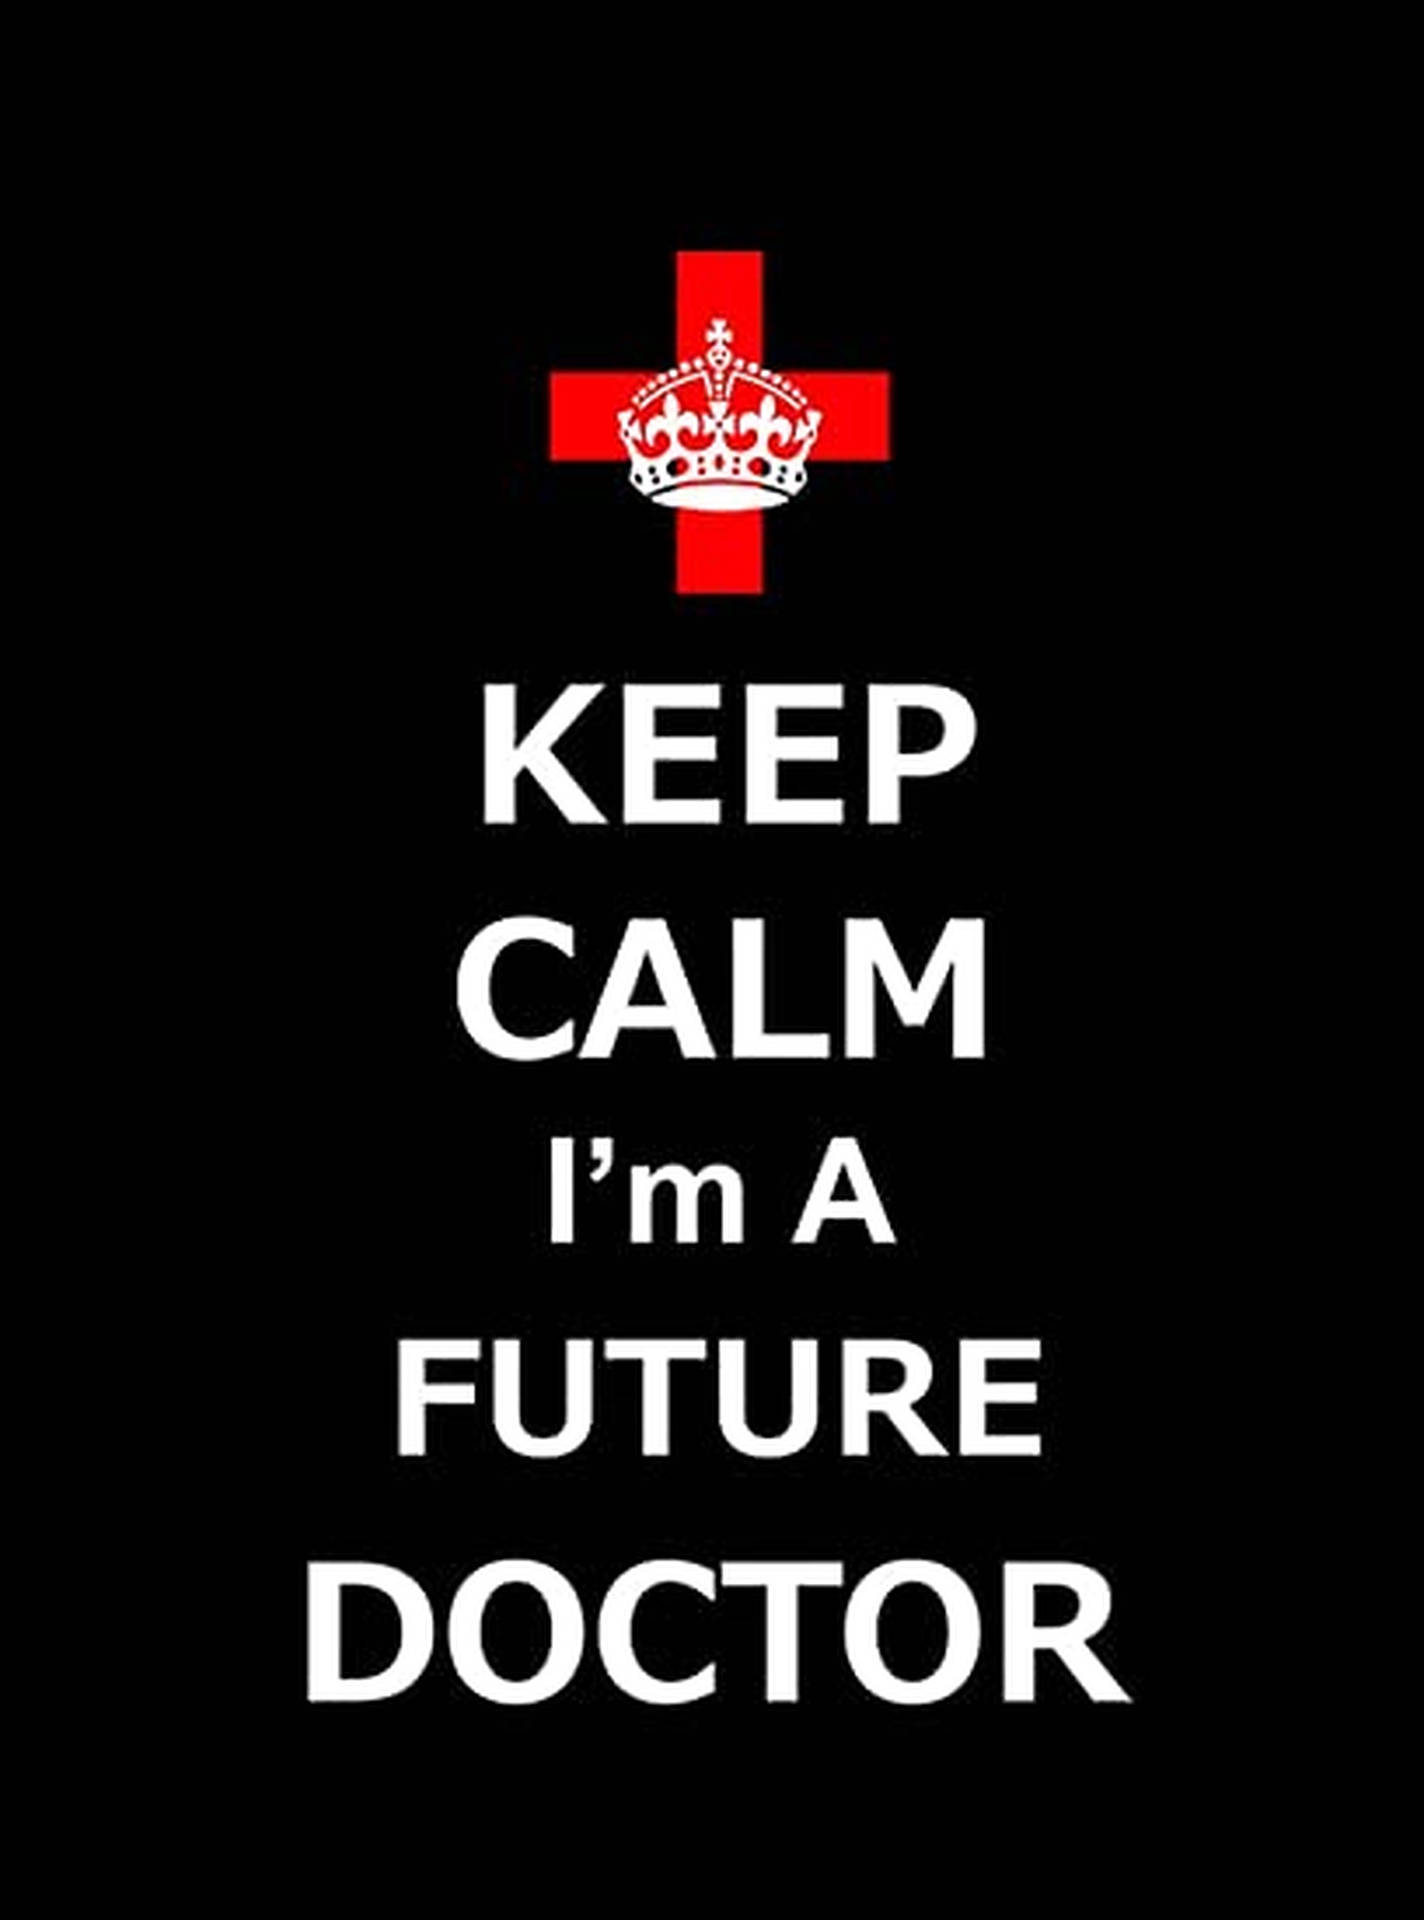 Confident Doctor in a Calm Atmosphere Wallpaper